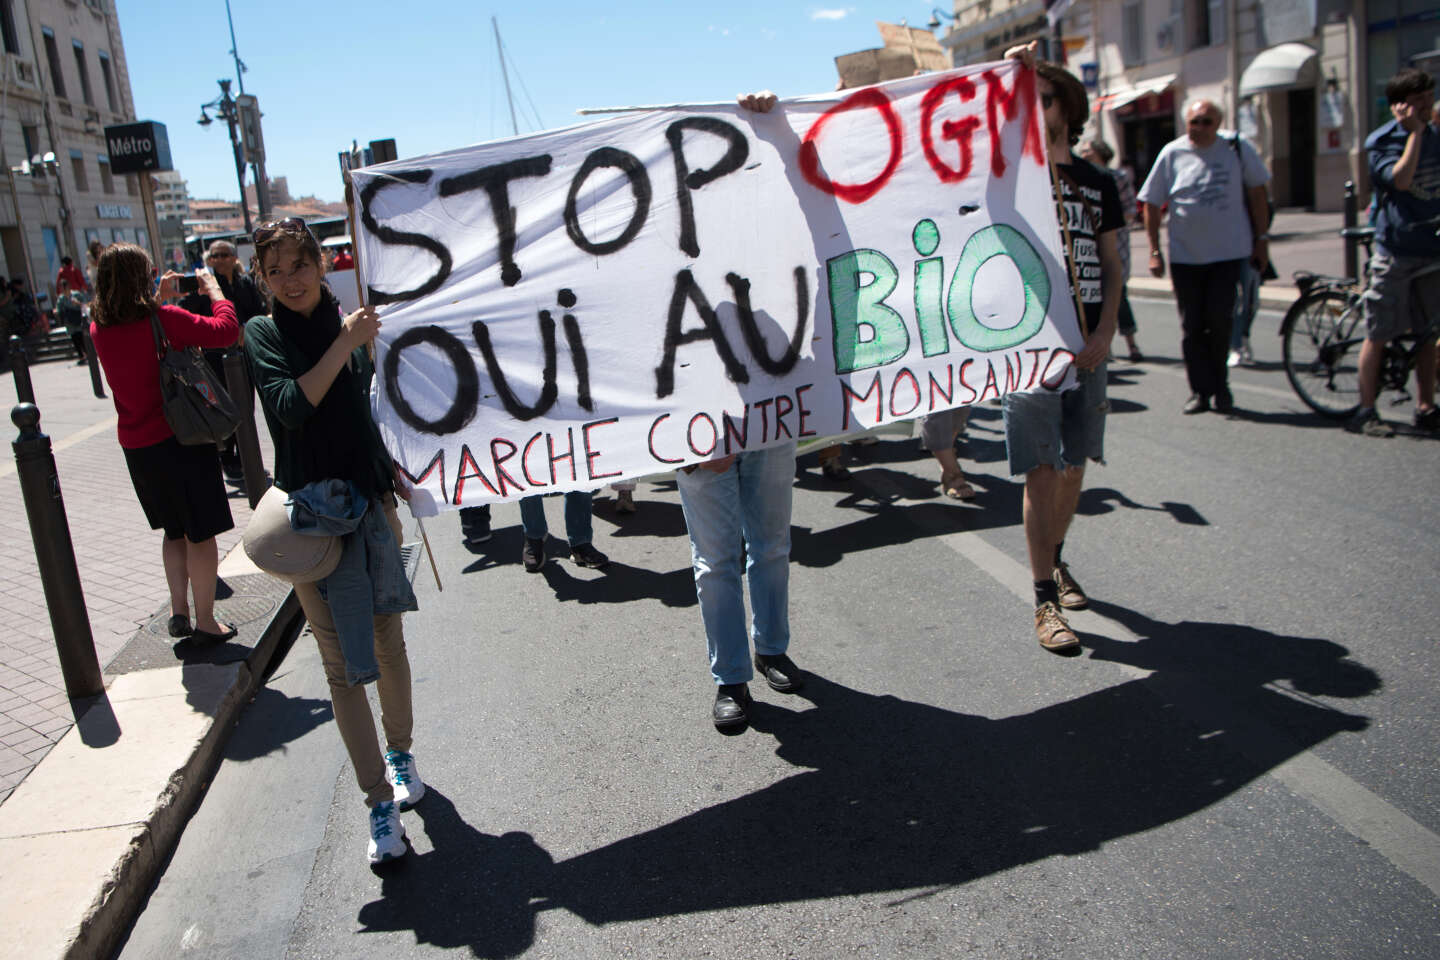 “With this new law, the French will face great difficulty in accessing GMO-free food”